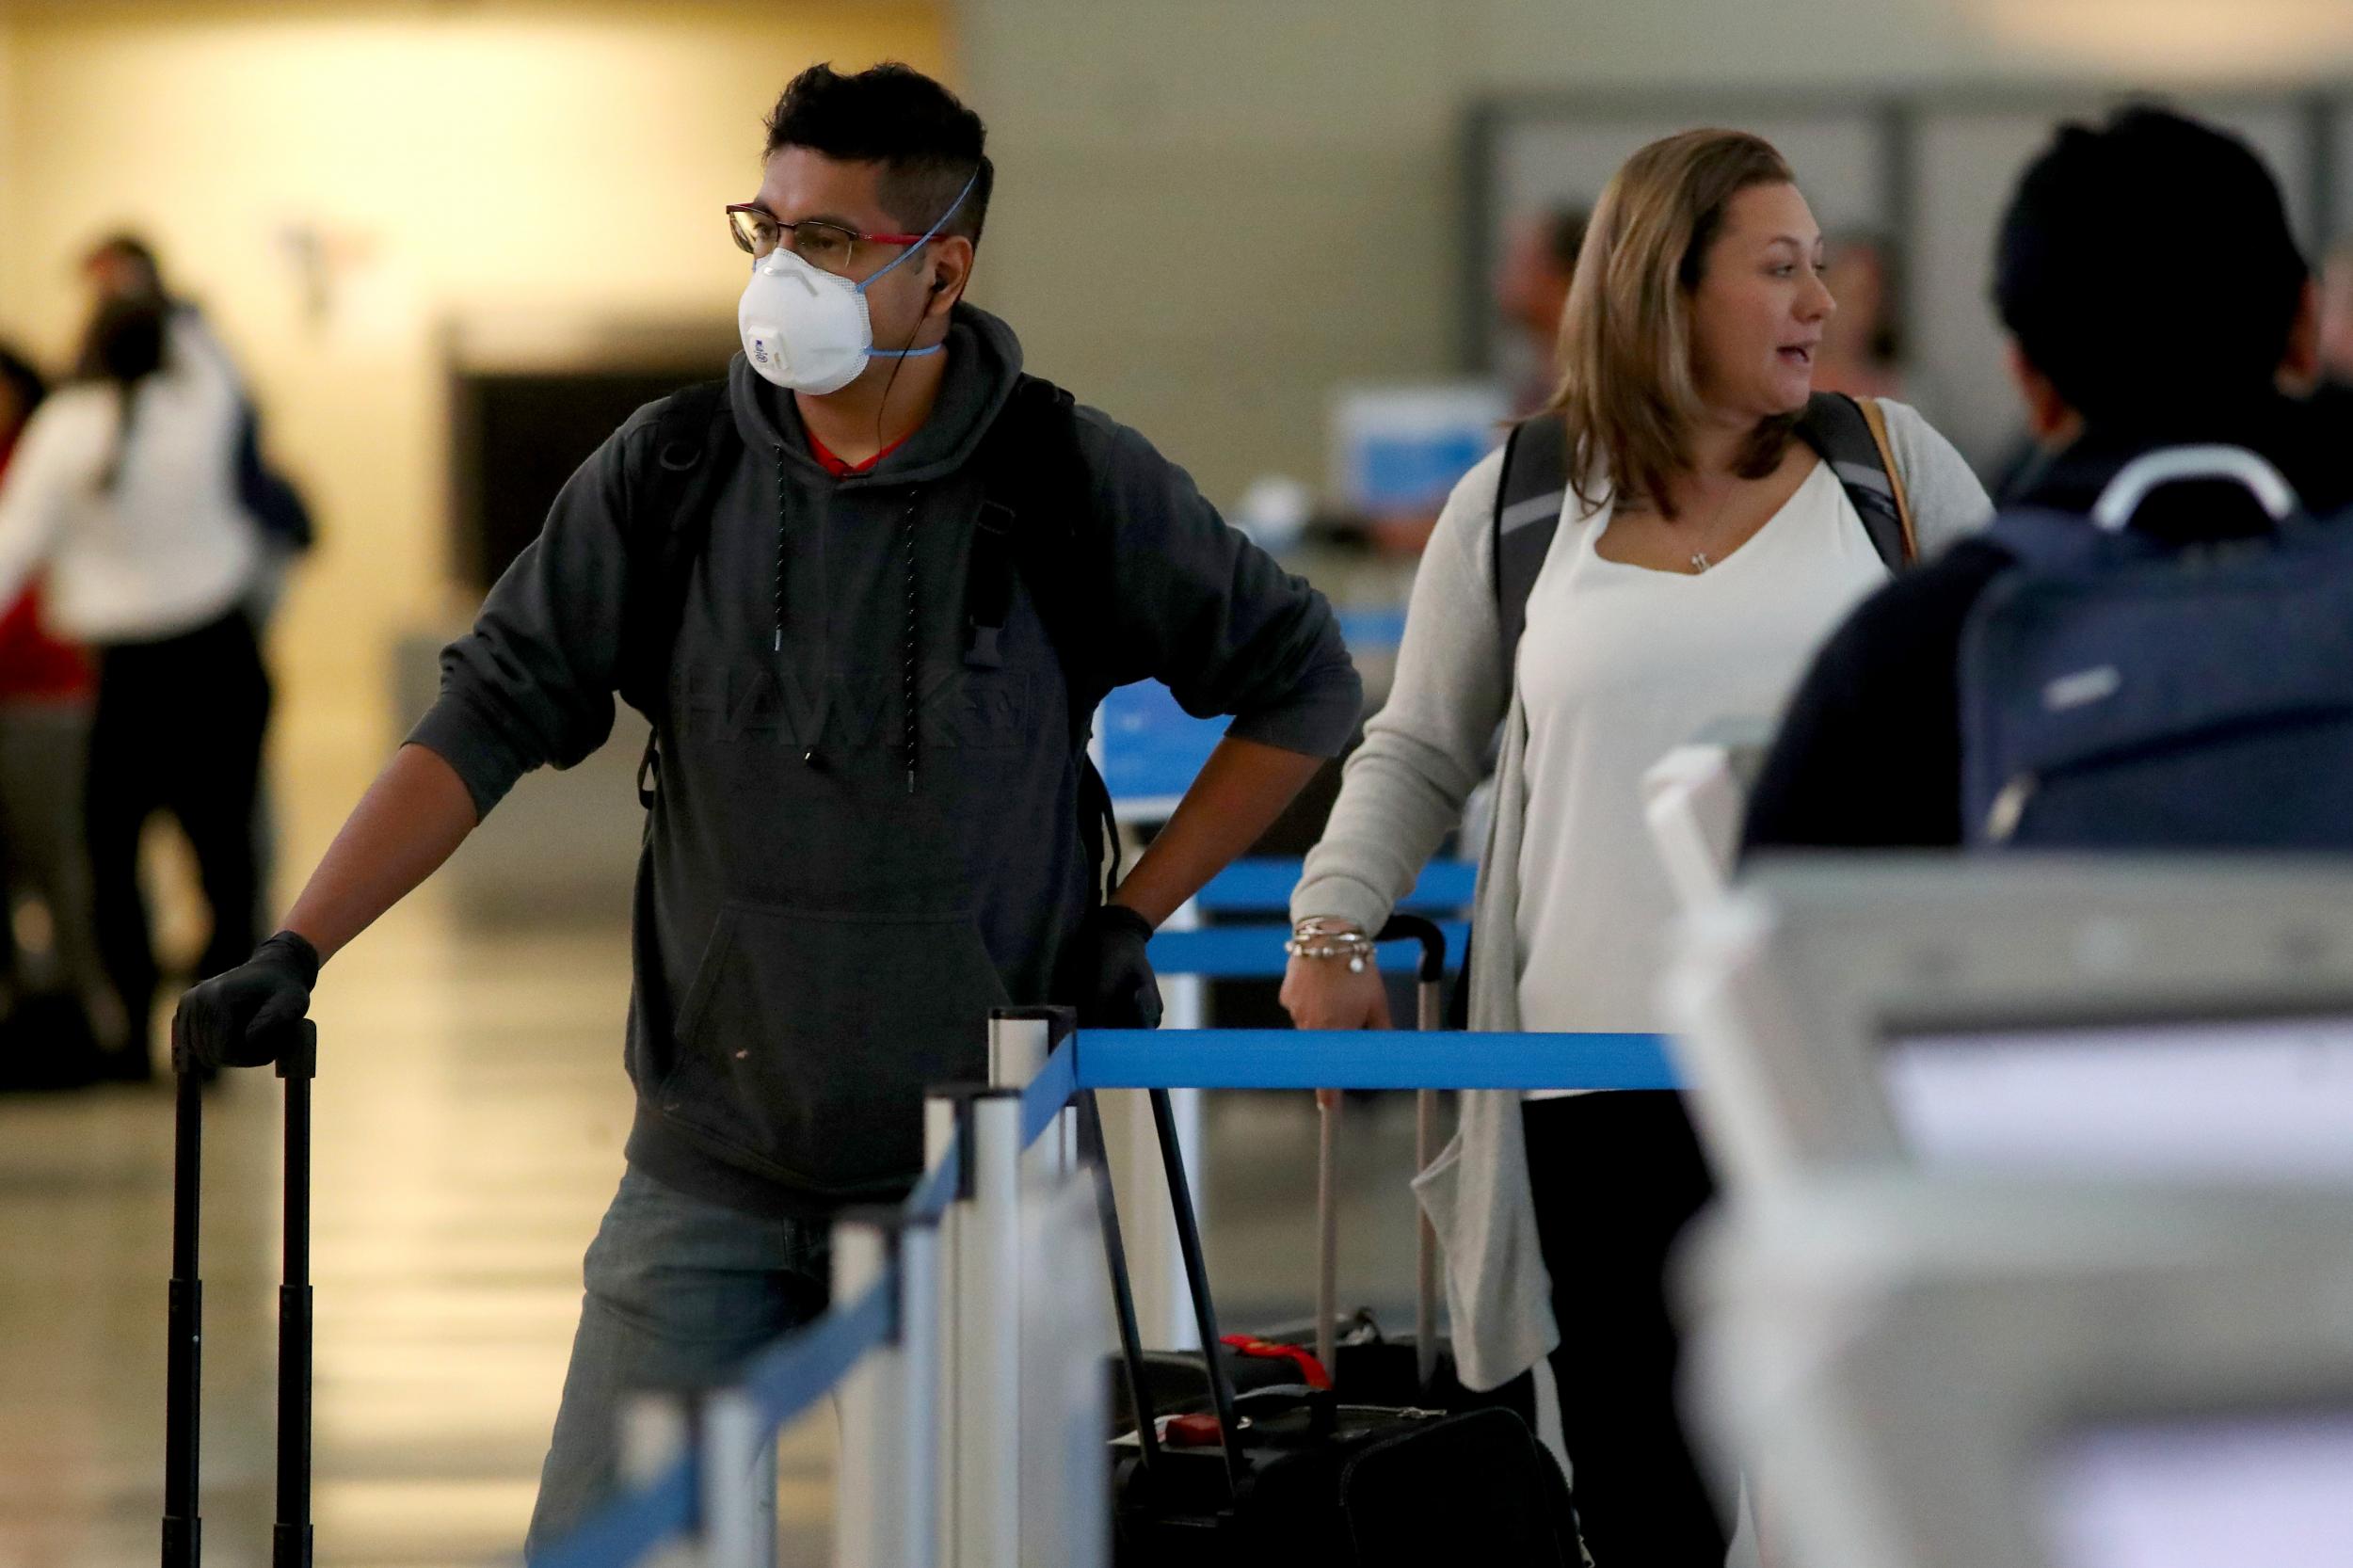 Airlines are among the businesses that have been hit hard by the coronavirus crisis